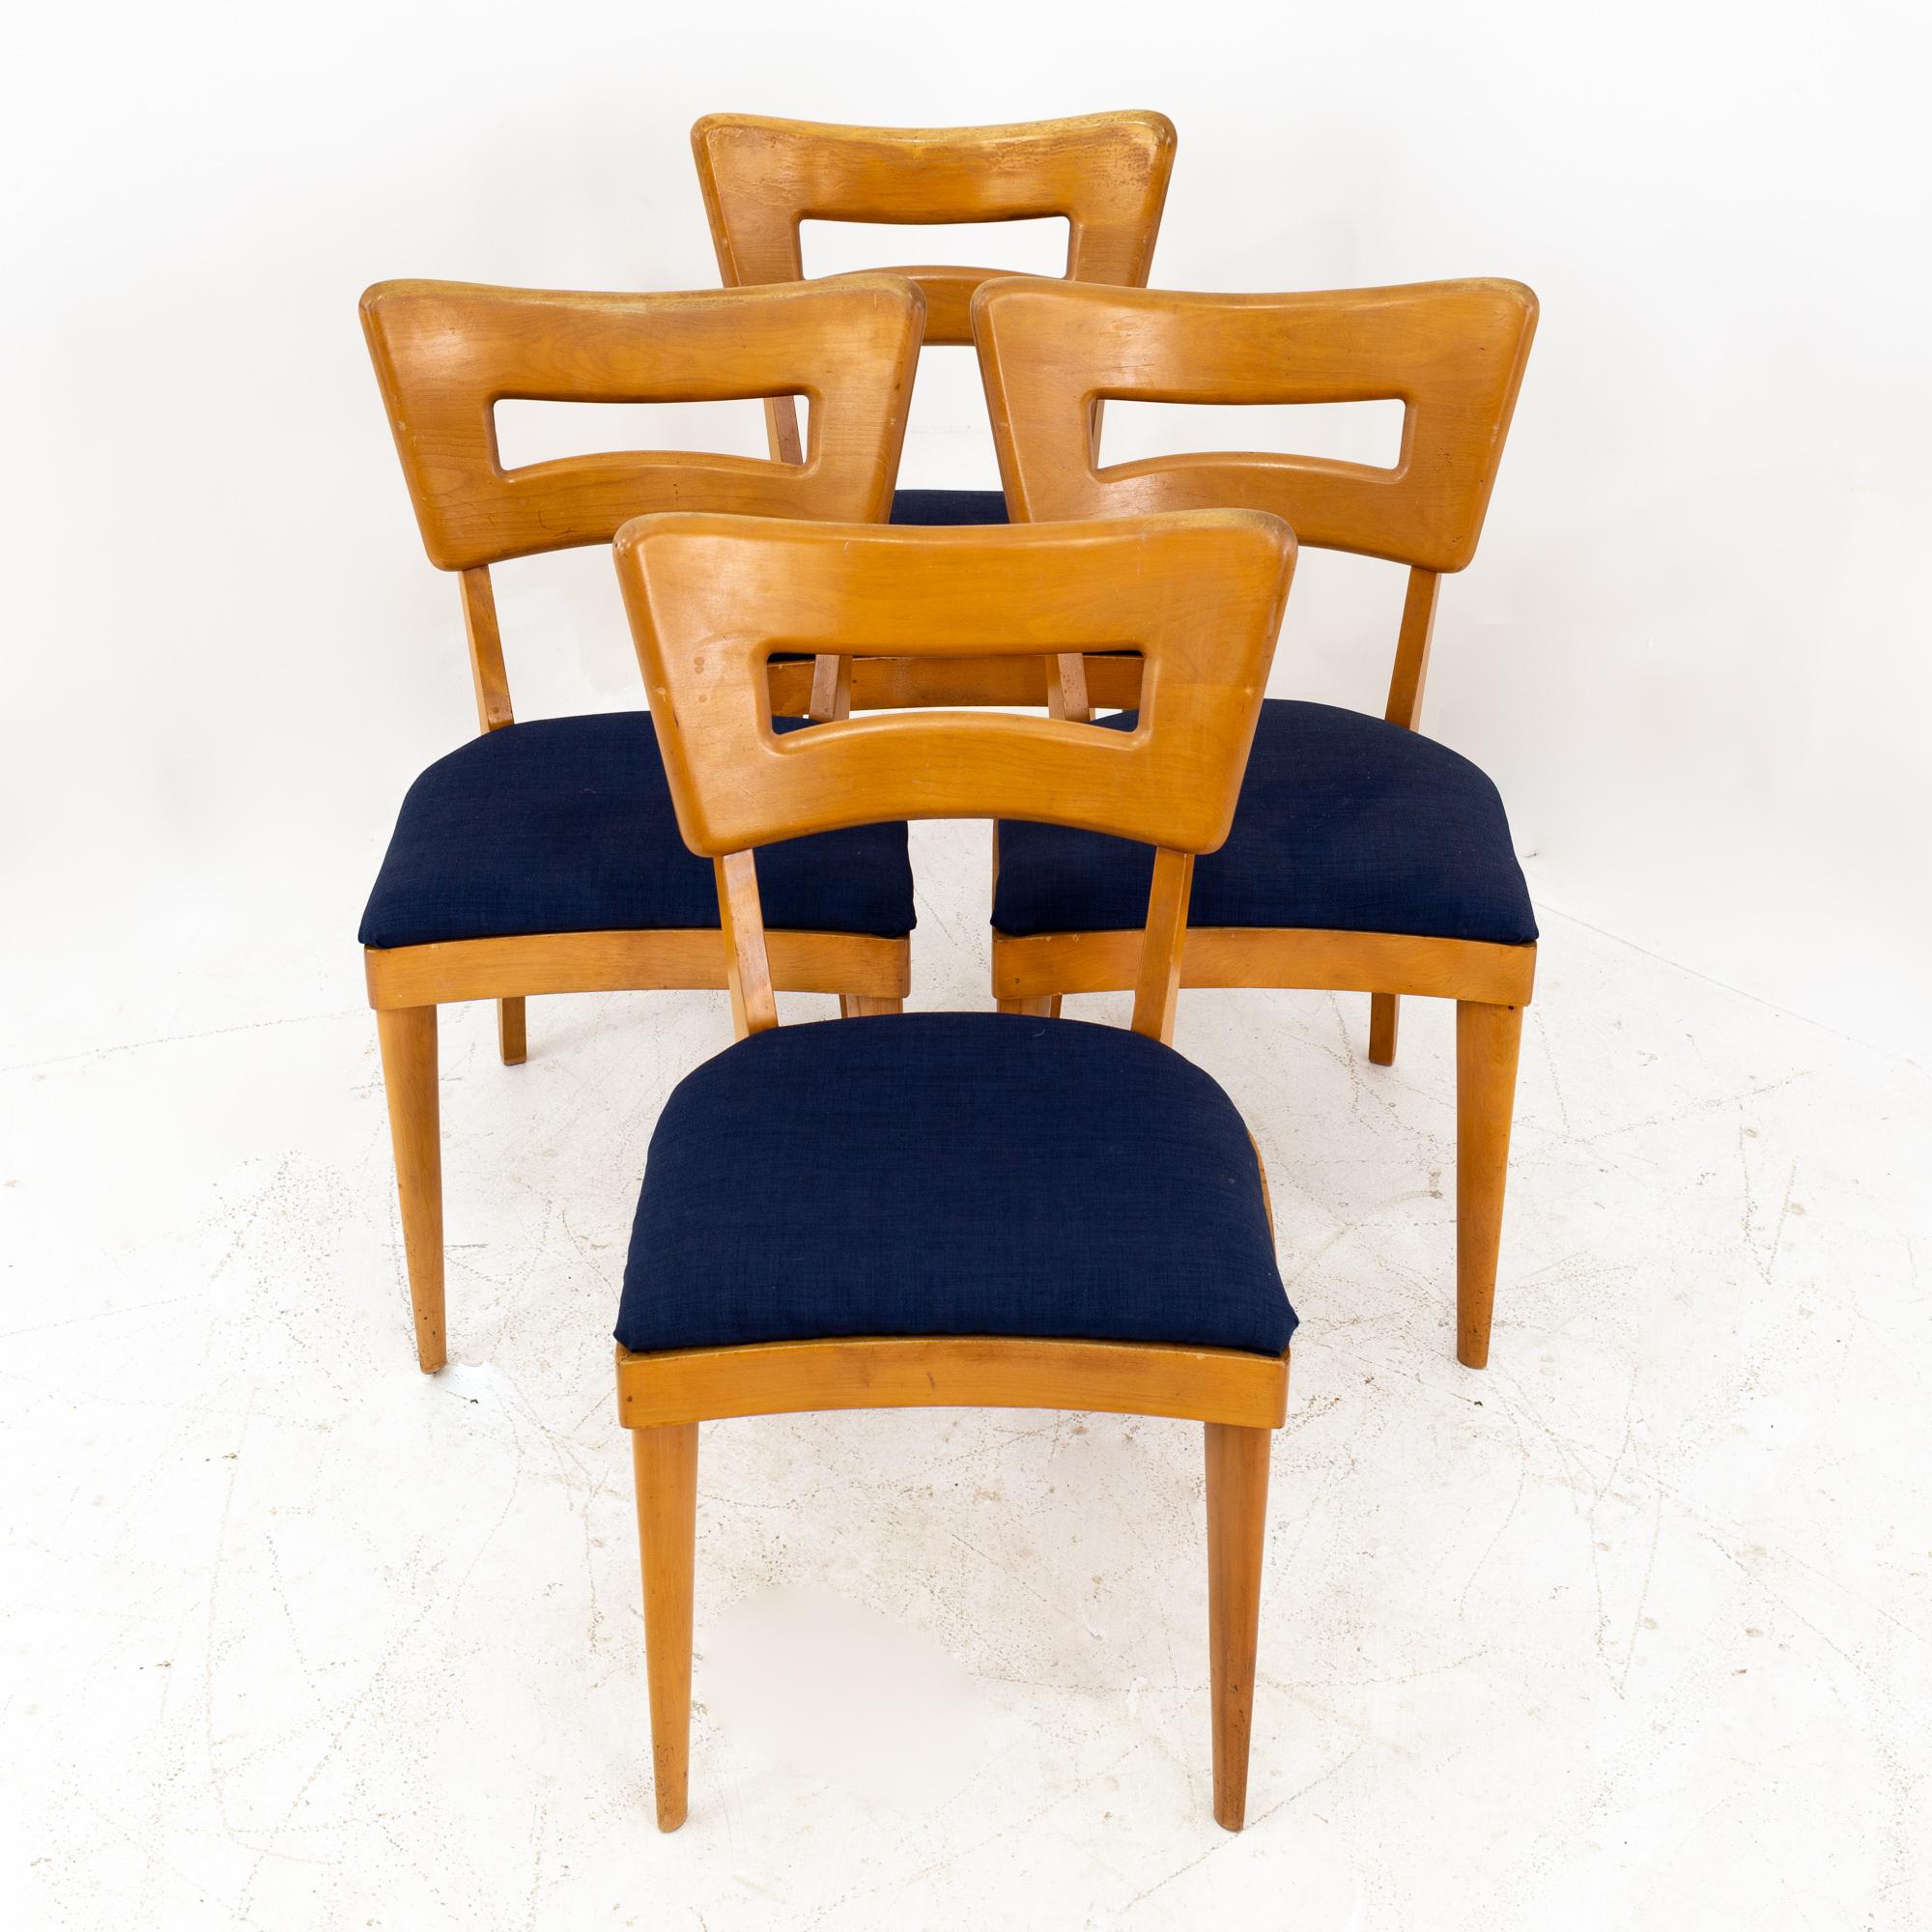 Heywood Wakefield dog bone midcentury solid wood dining chairs, set of four
These chairs are 18 wide and 21 deep by 33 high with an 18.75 inch seat height

All pieces of furniture can be had in what we call restored vintage condition. This means